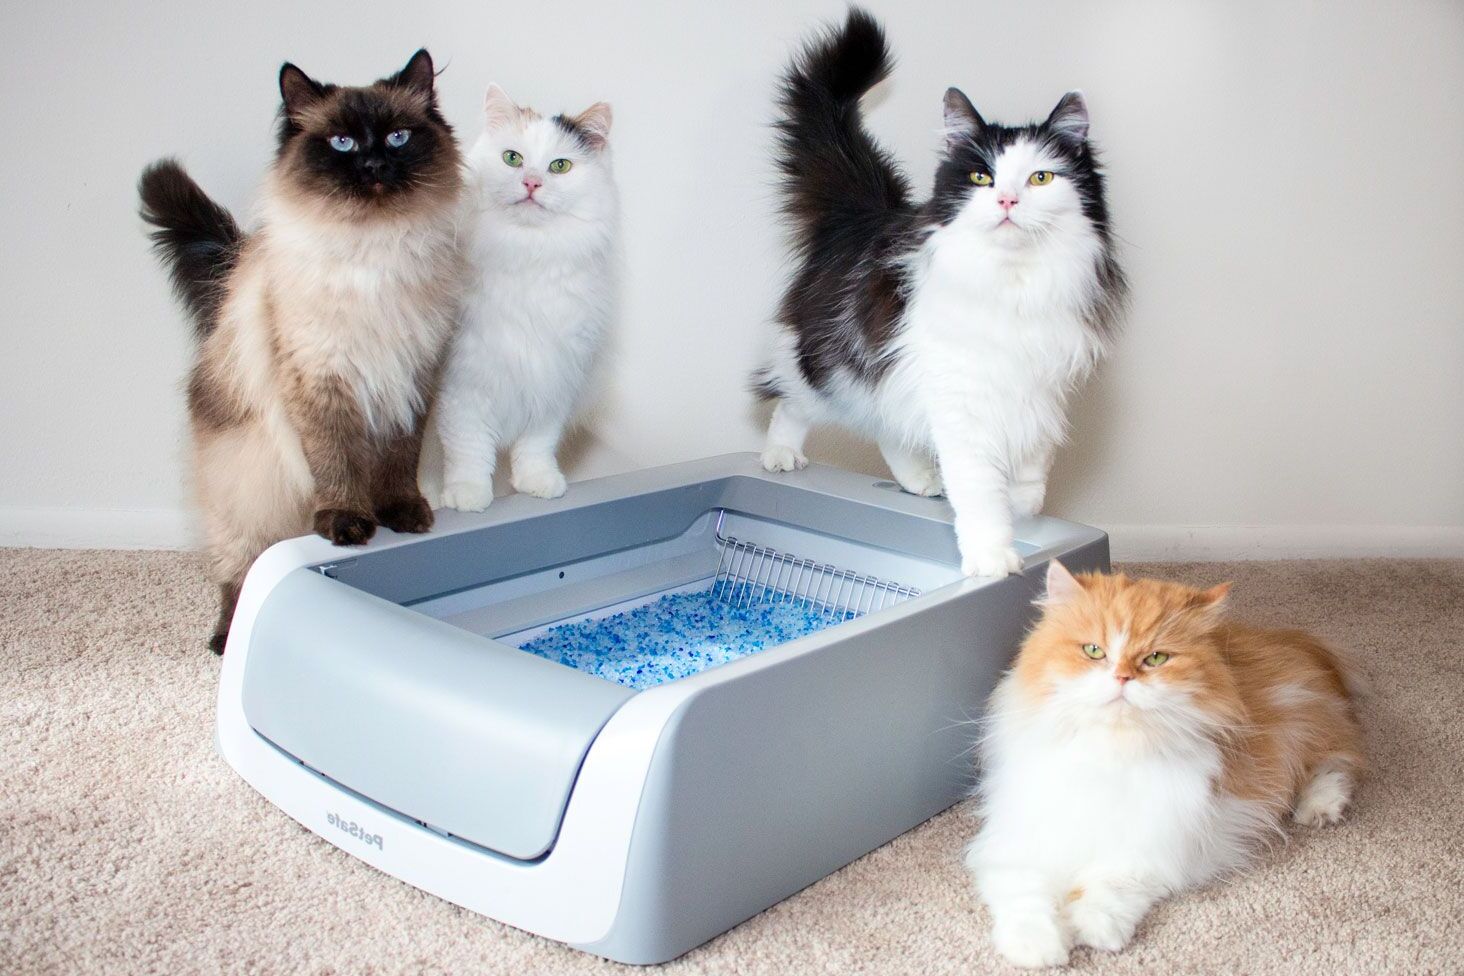 How To Get Cats To Share A Litter Box